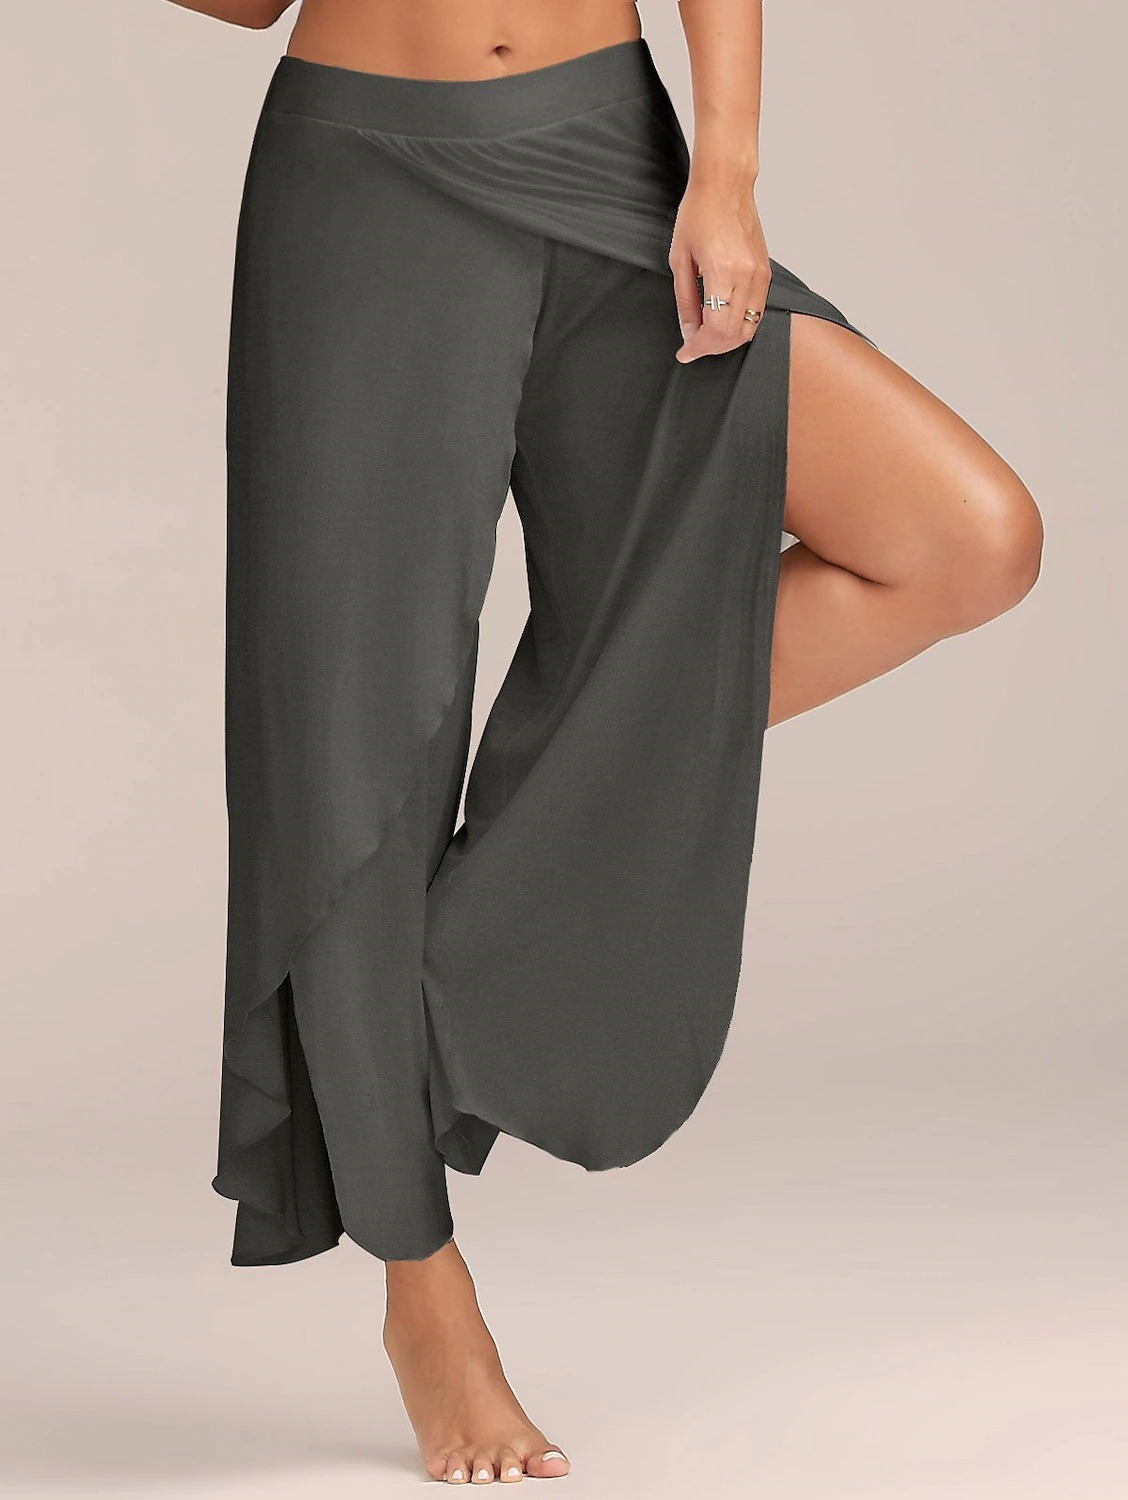 Women's Basic Casual / Sporty Culottes Wide Leg Chinos Layered Split Ruffle Pants Casual Daily Stretchy Letter Mid Waist Loose